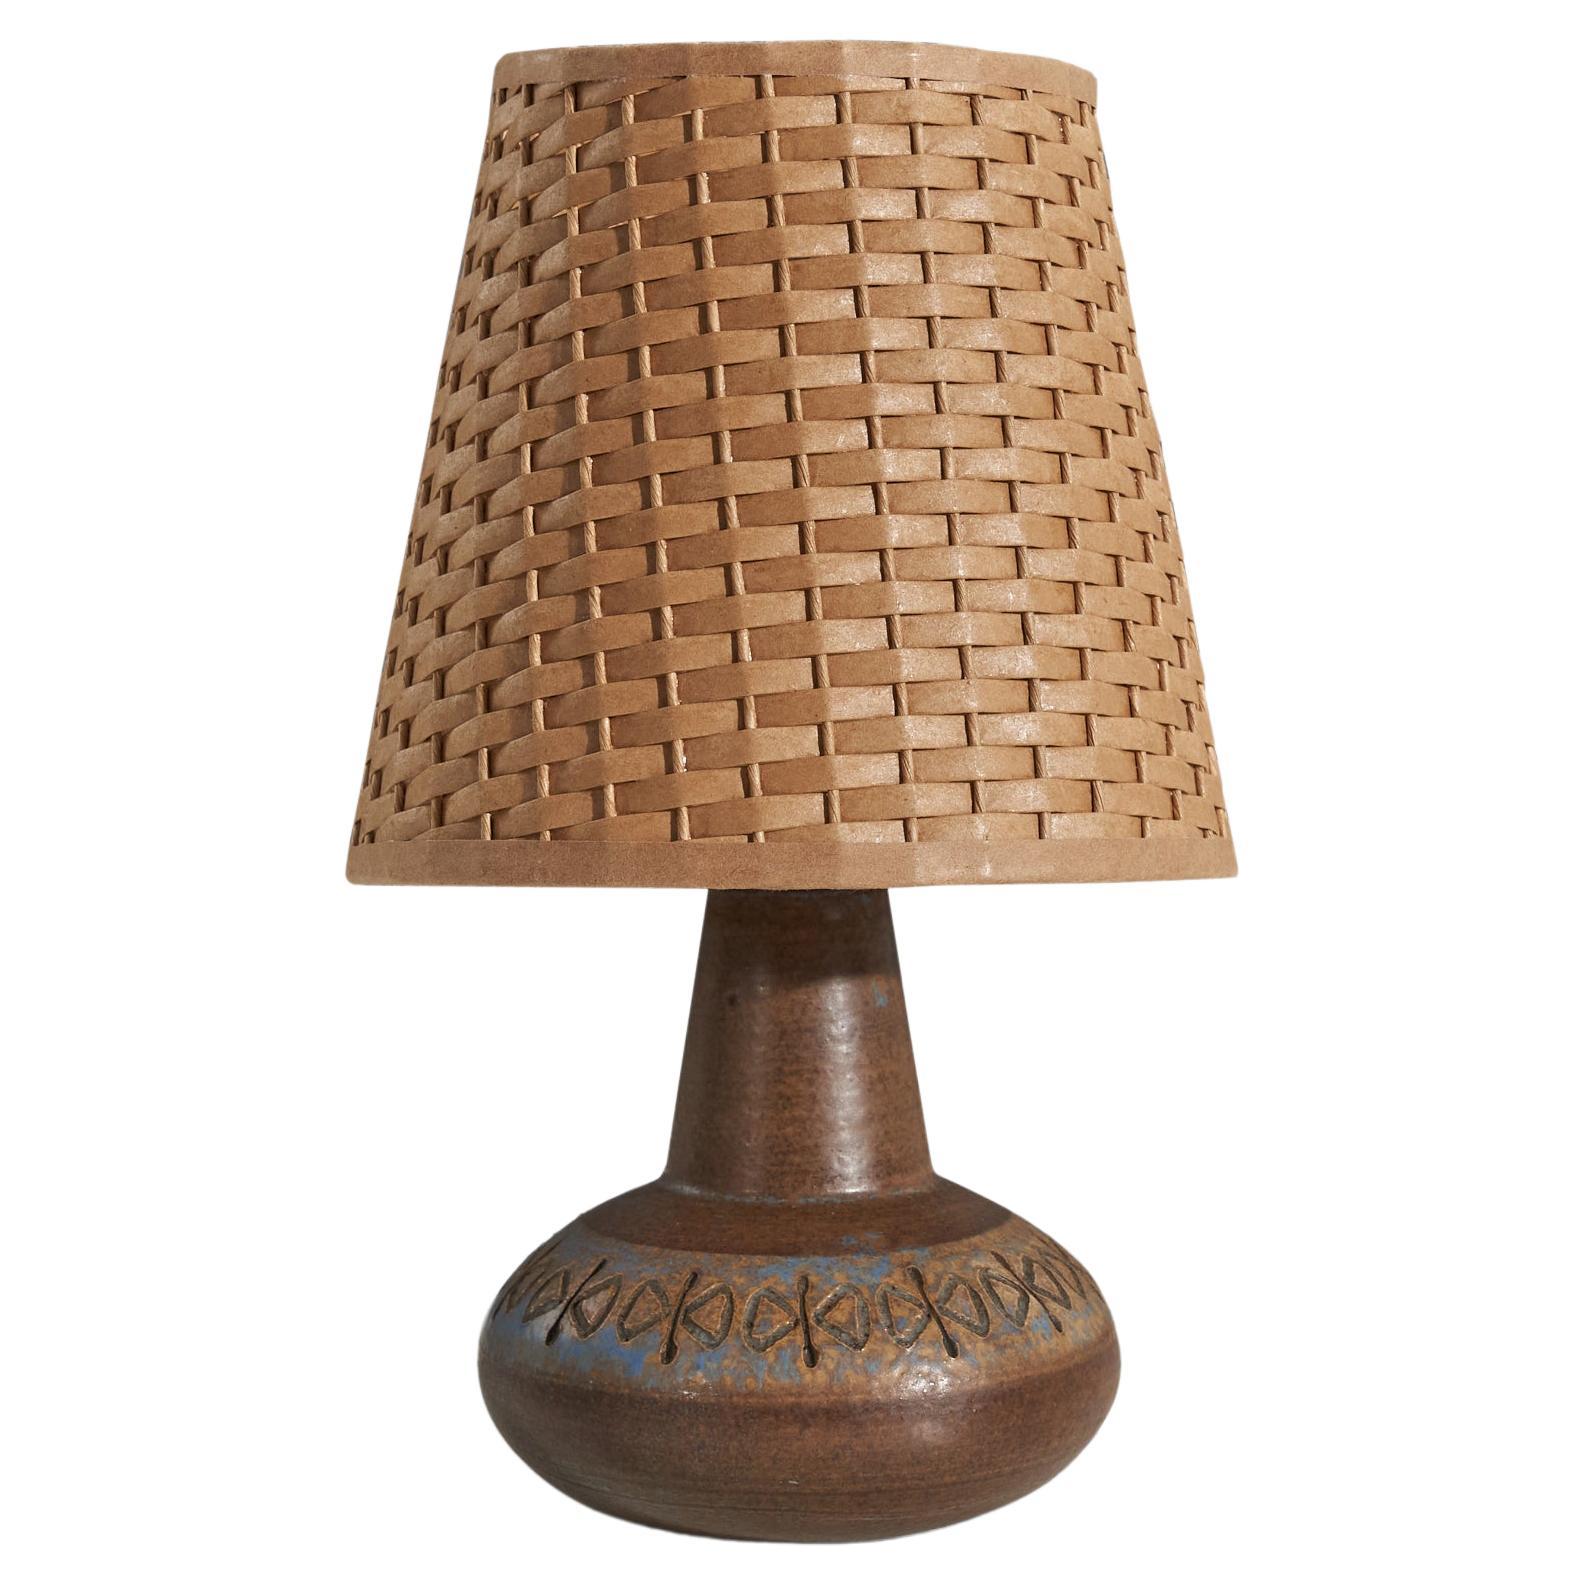 Ulla Winbladh, Brown Table Lamp, Glazed Incised Stoneware, Sweden, 1950s For Sale